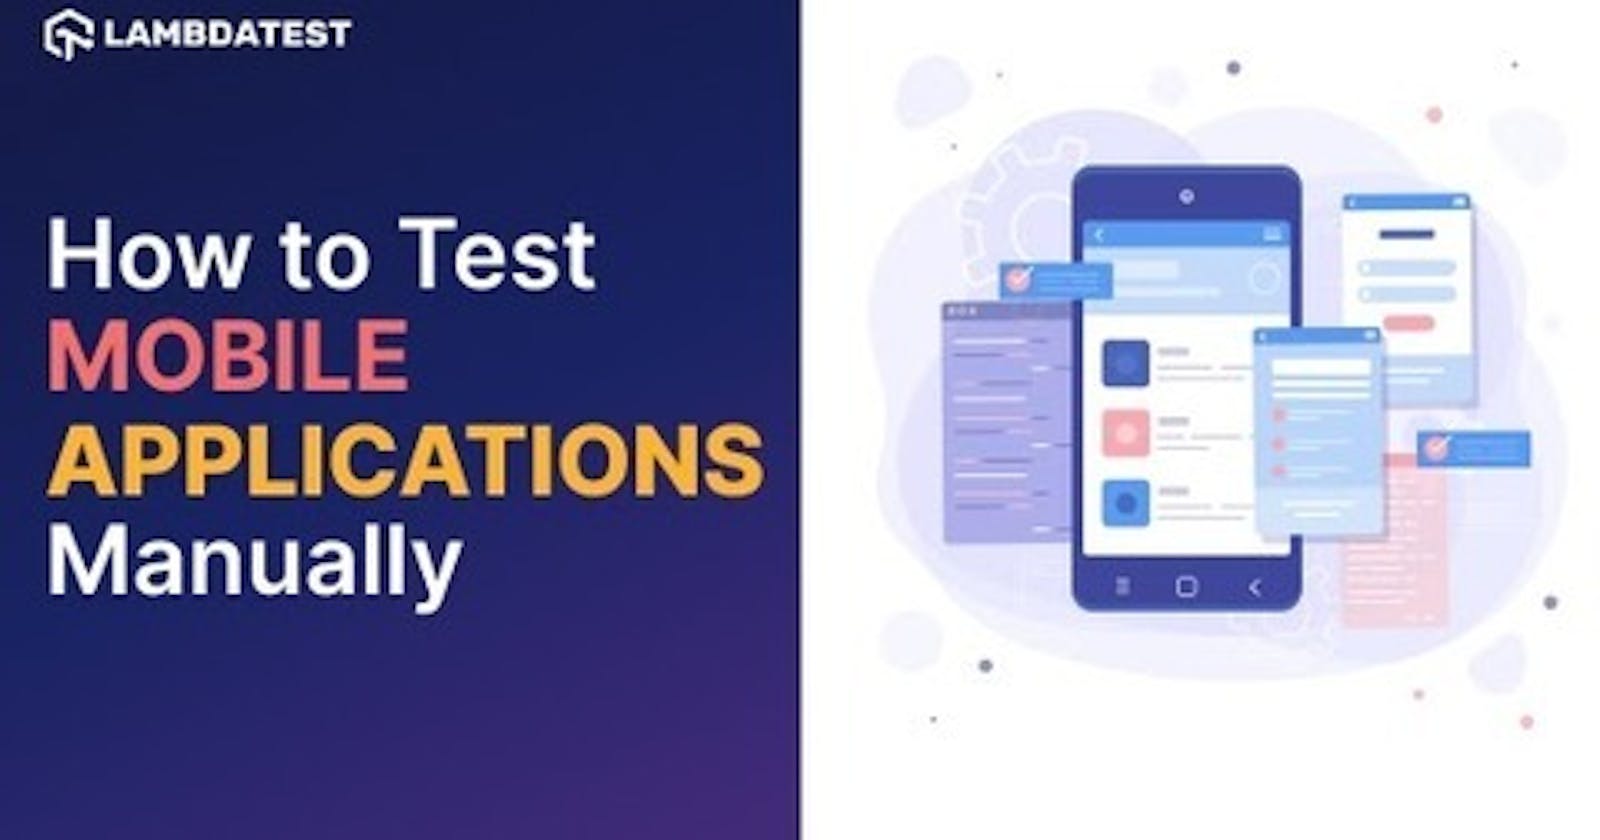 How To Test Mobile Applications Manually